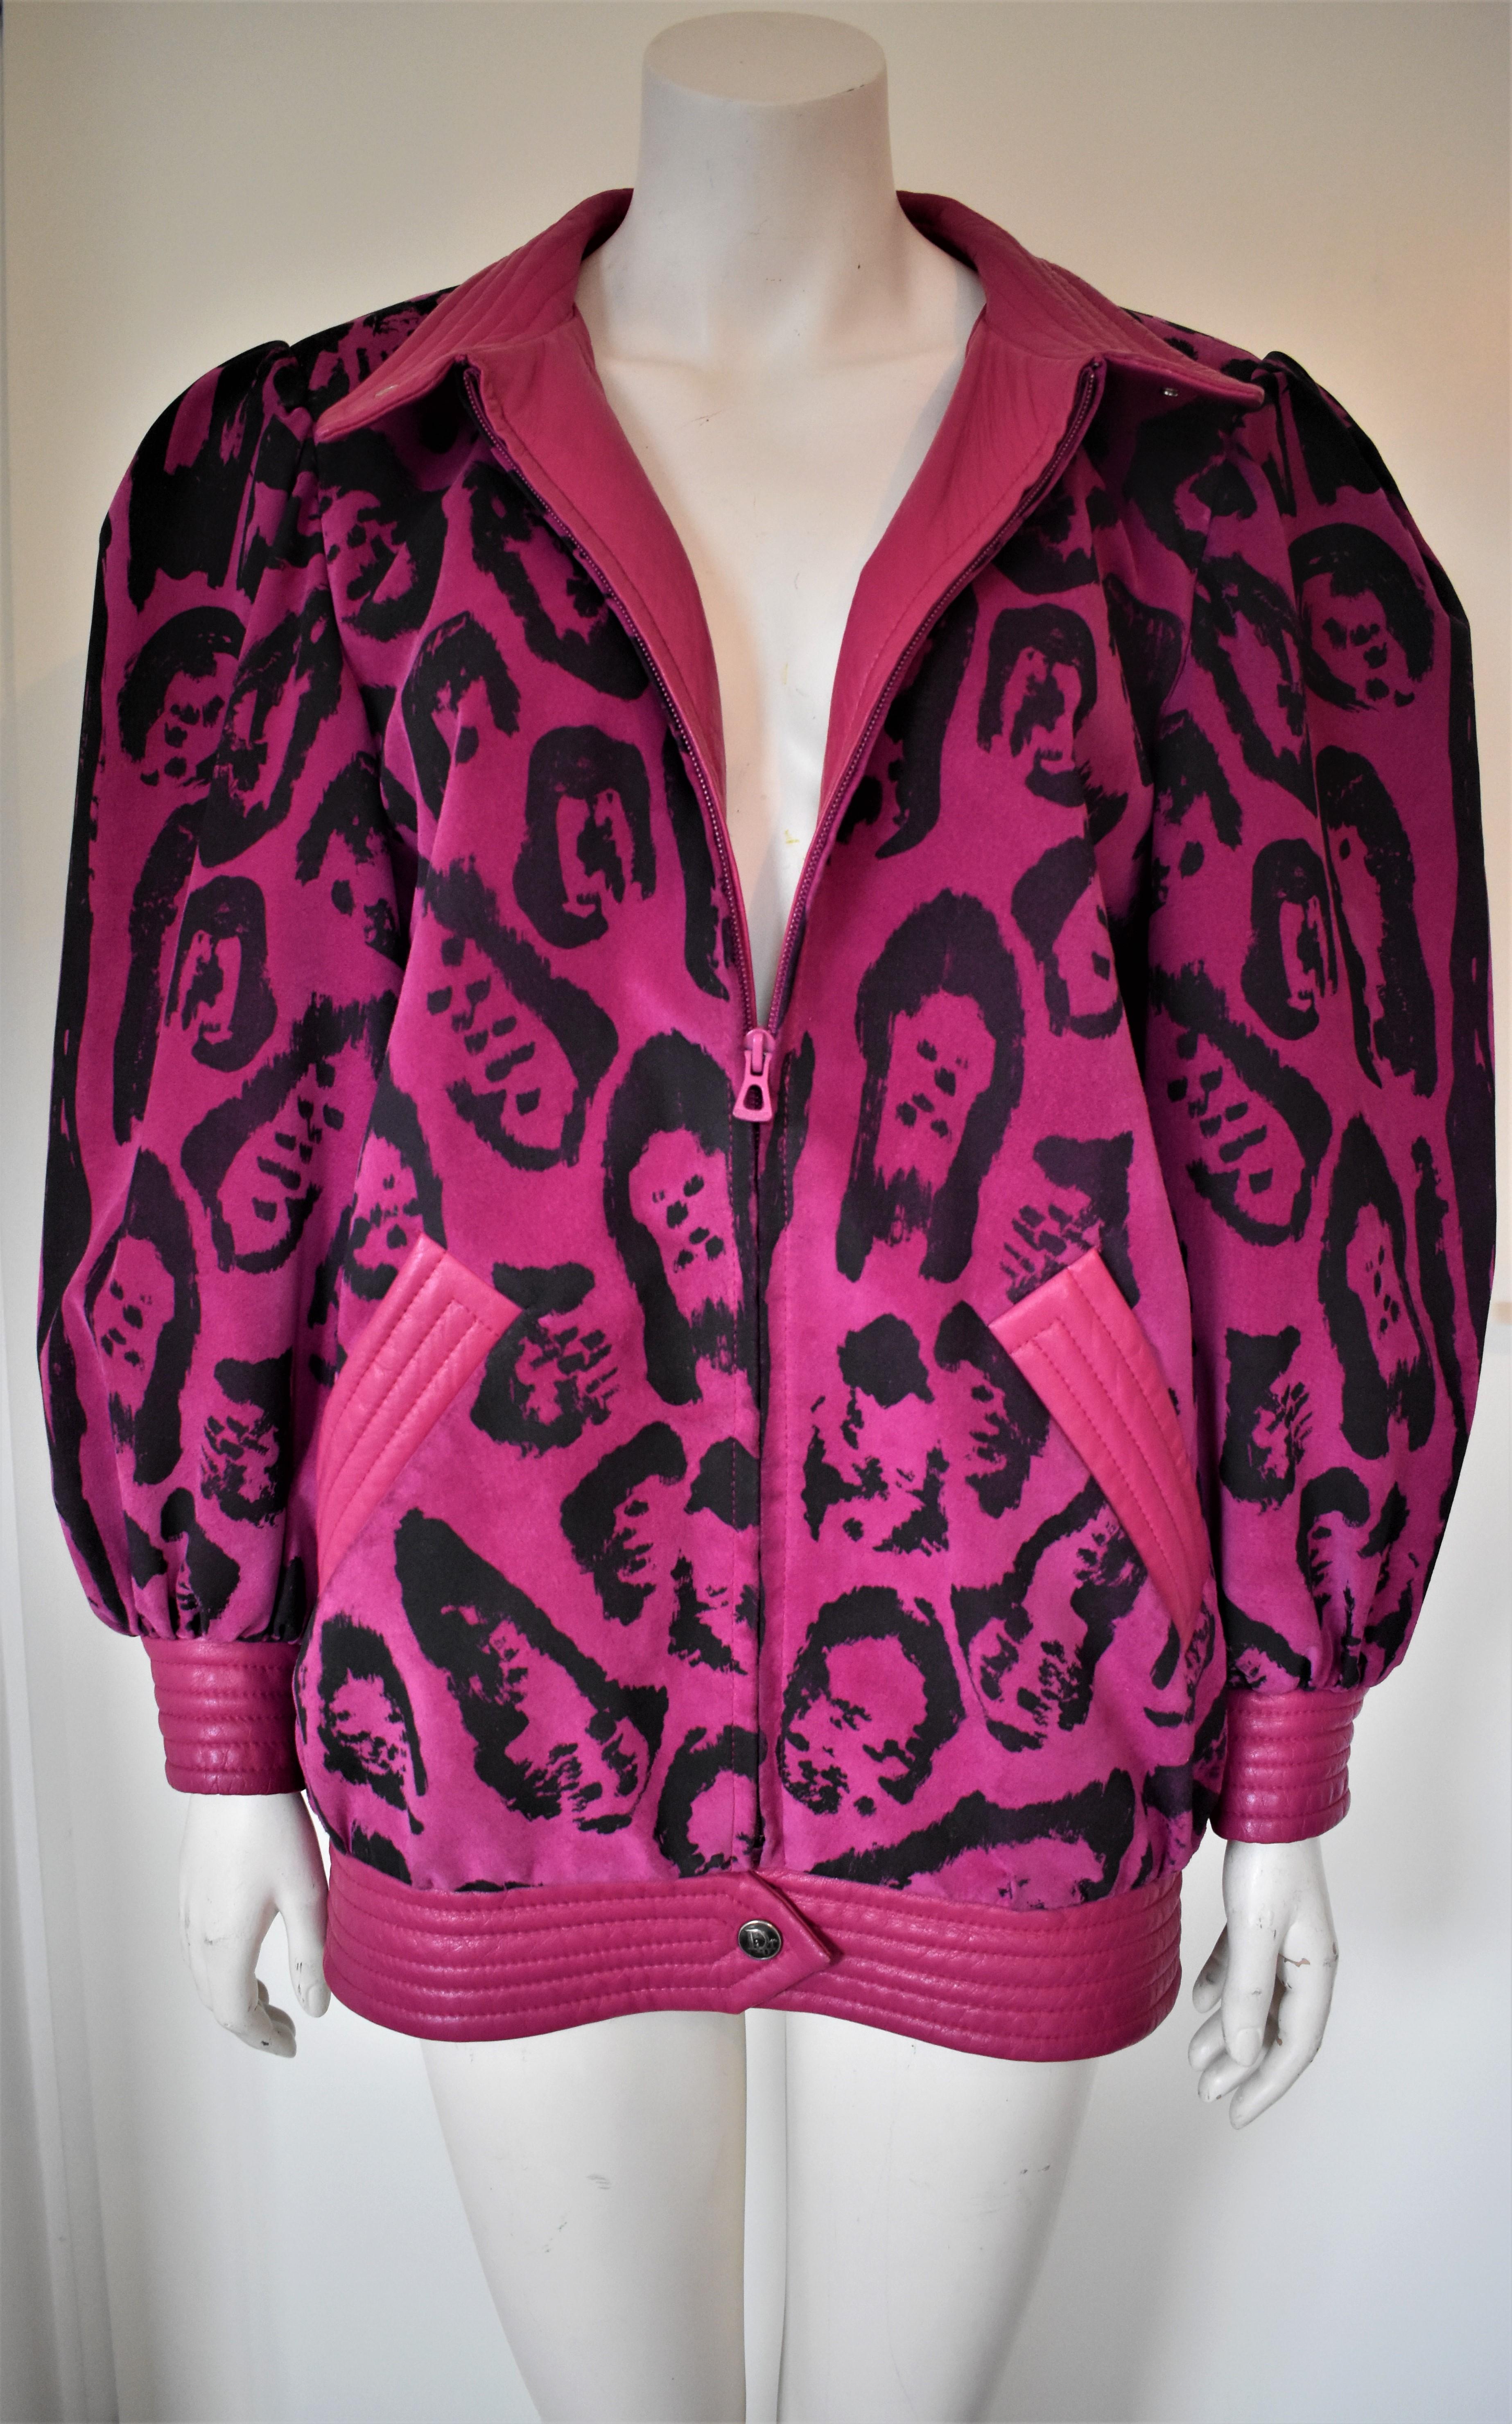 Rare and iconic Dior Boutique Cuirs jacket in hot pink suede with leather trimmings in a very good condition. The model is oversized, it is a little to big for the mannequin, but it still looks very good. Before shipping, the jacket will be sent to